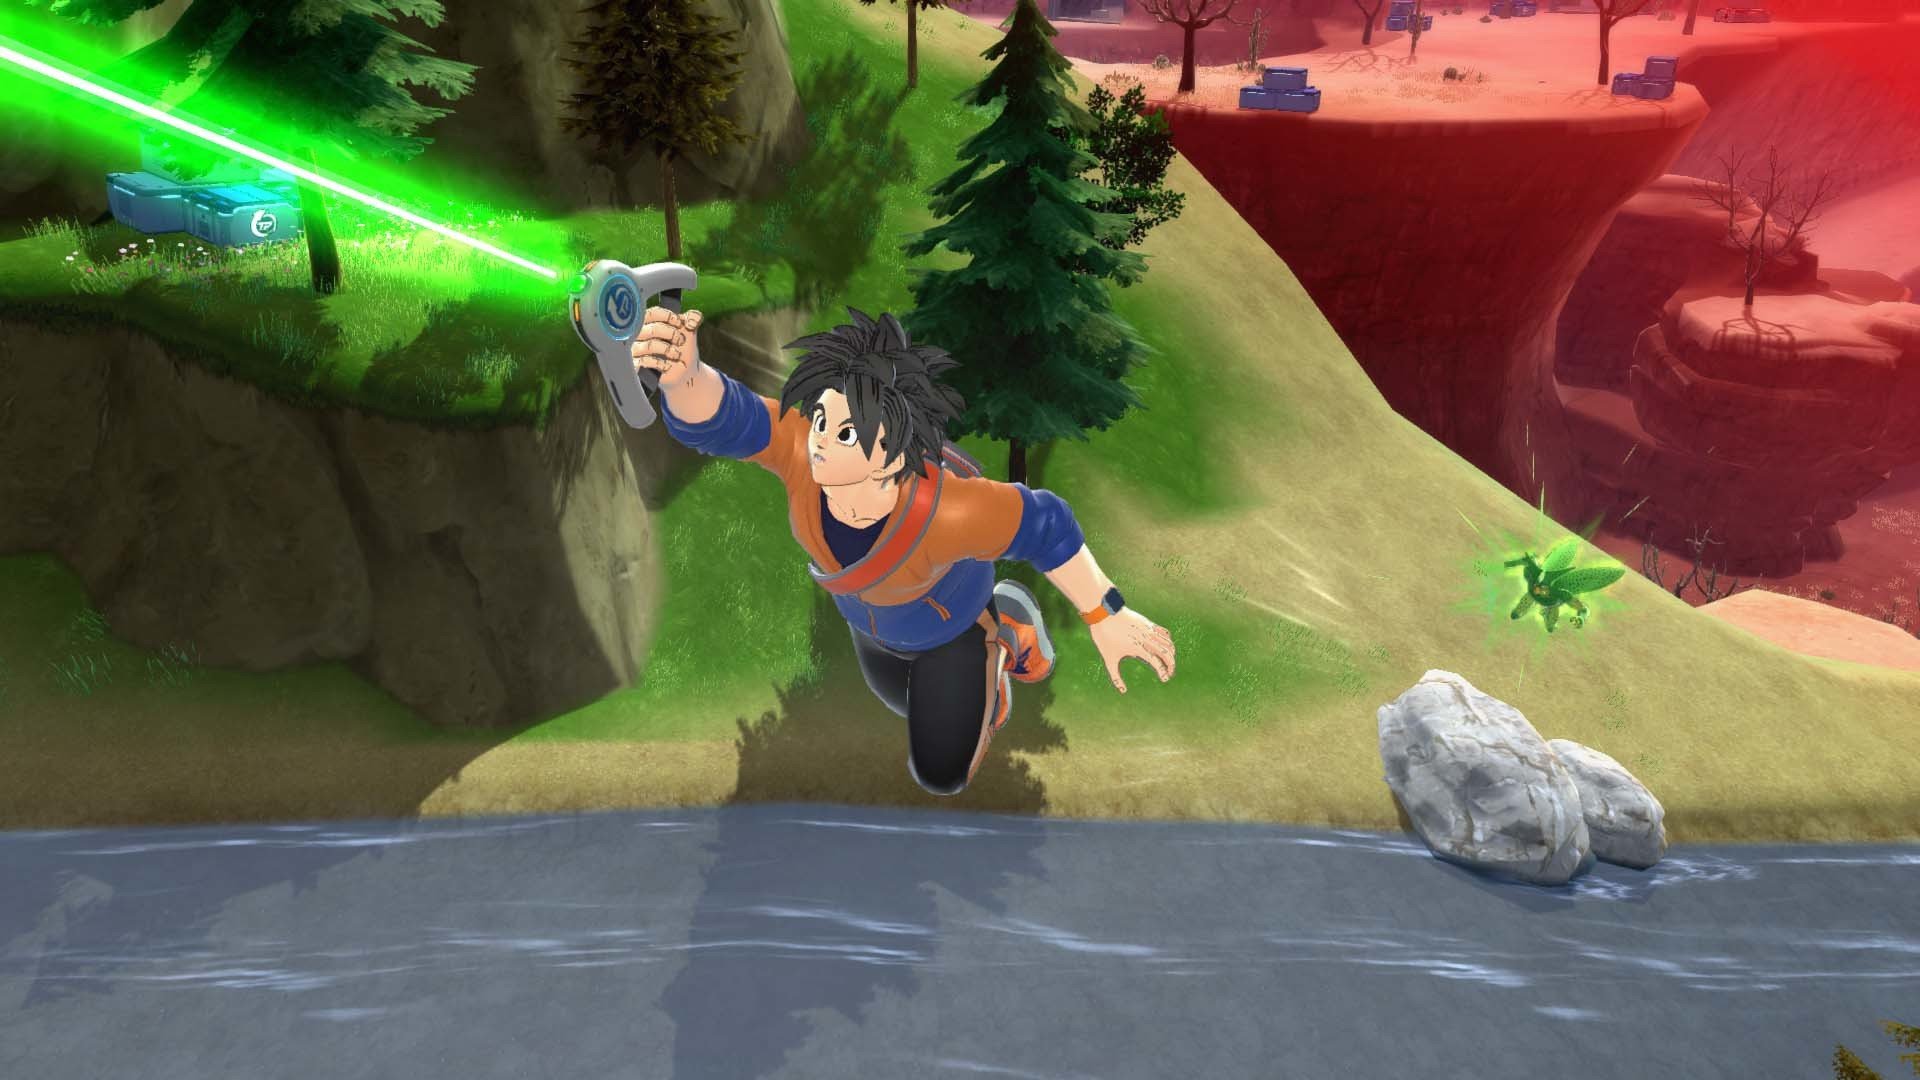 Dragon Ball: The Breakers (2022), PS4 Game